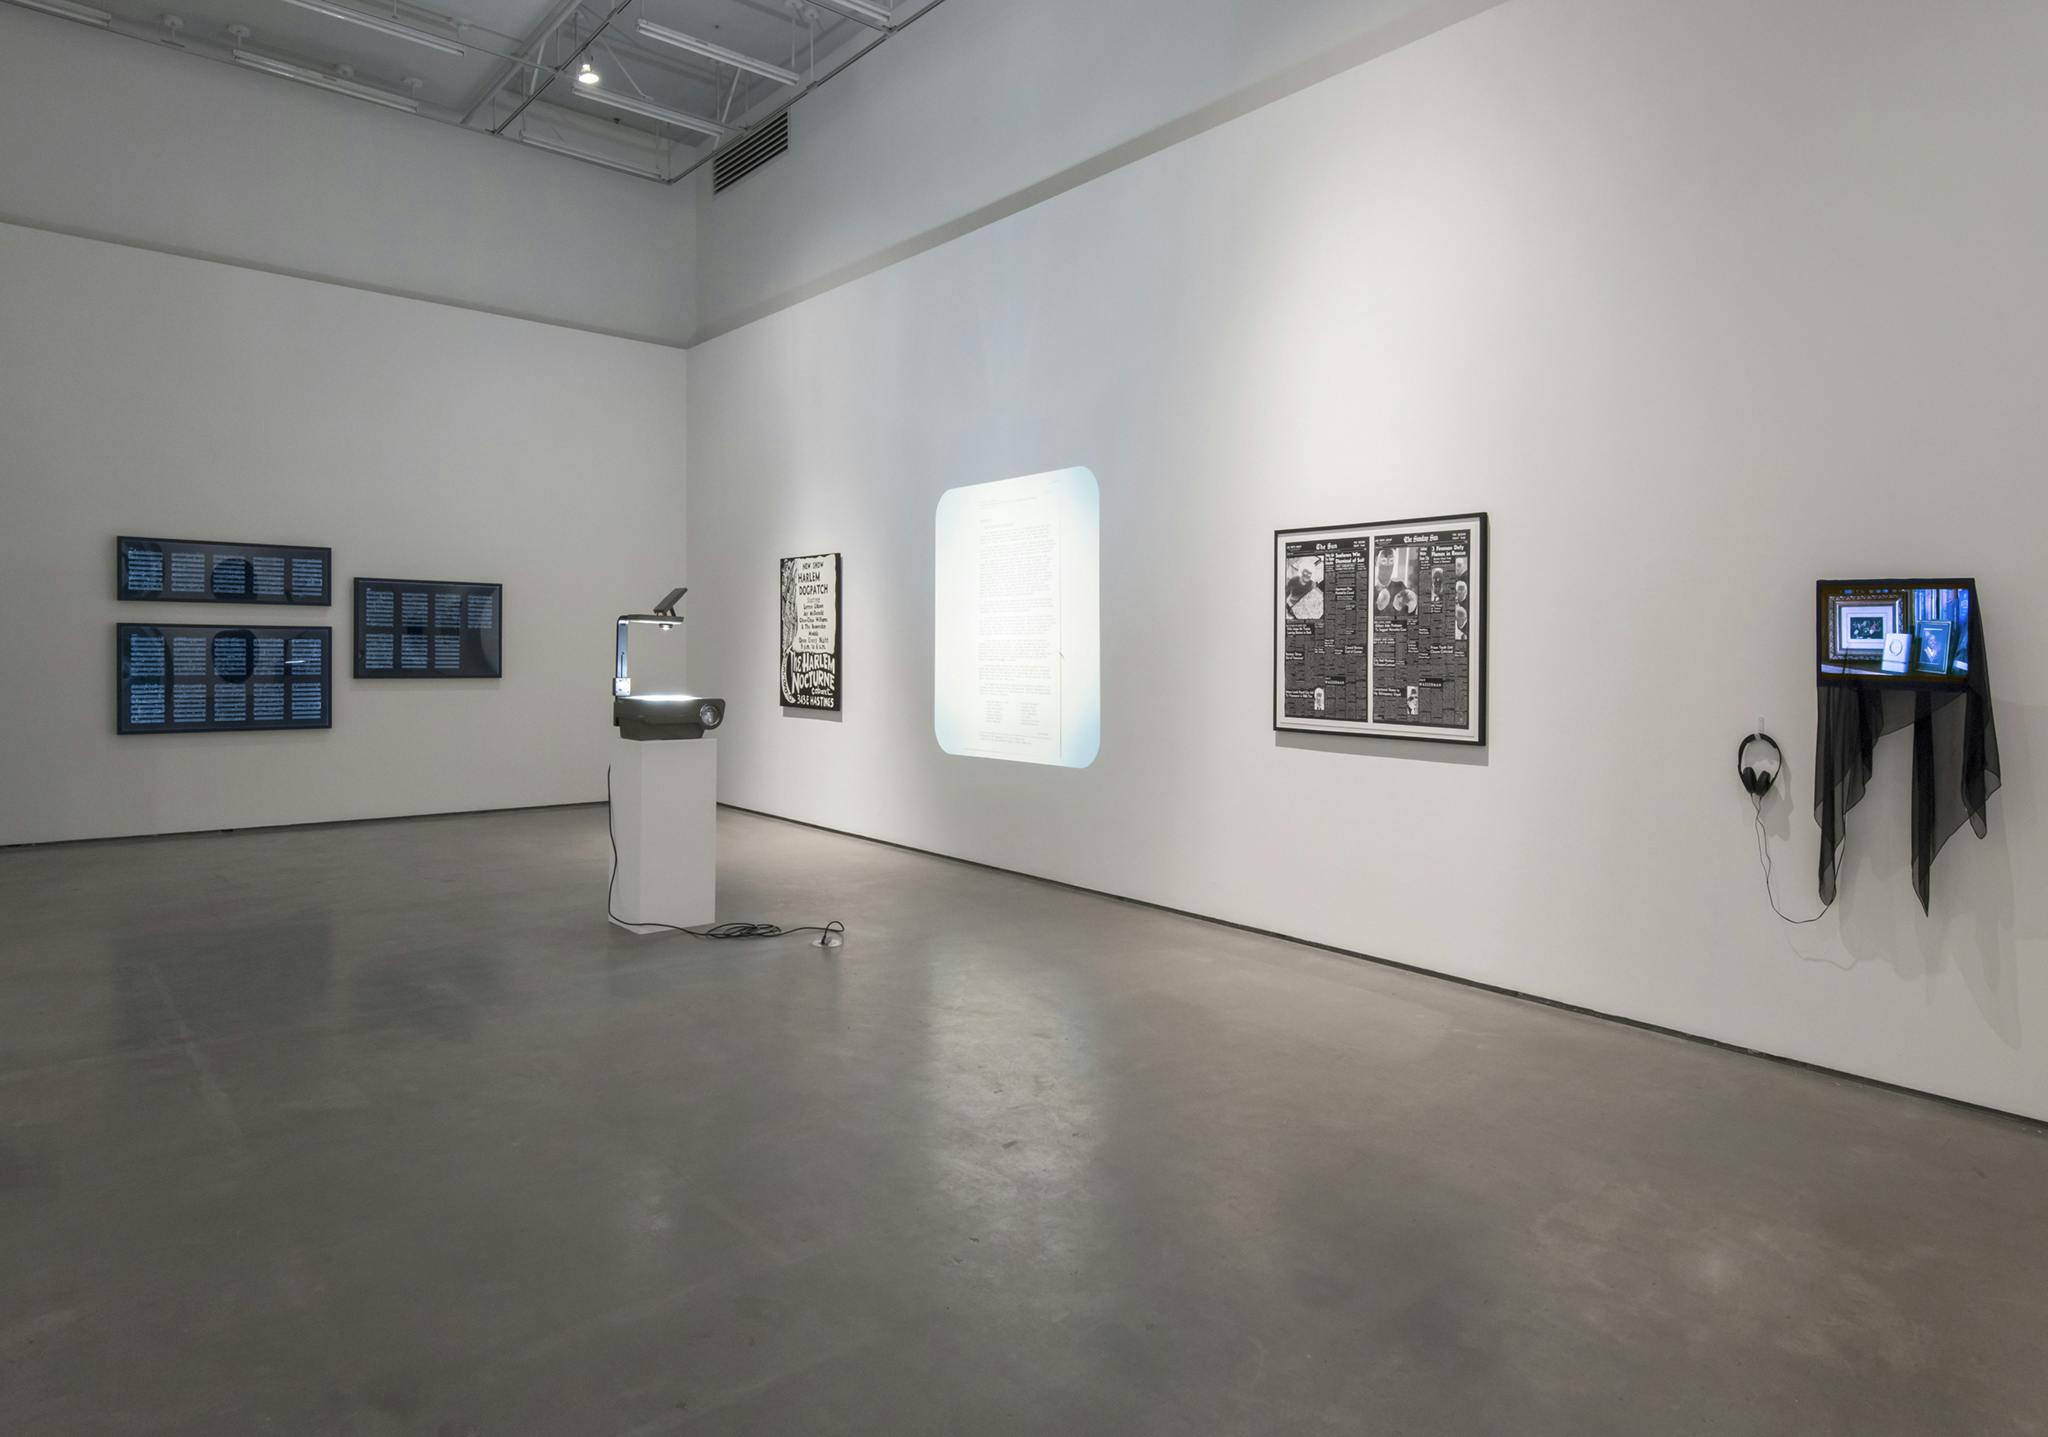 Multimedia works installed in a gallery: a video on a monitor, a framed print, an overhead projector projecting a text document, a black & white painting, and choreographic notes in three lightboxes.